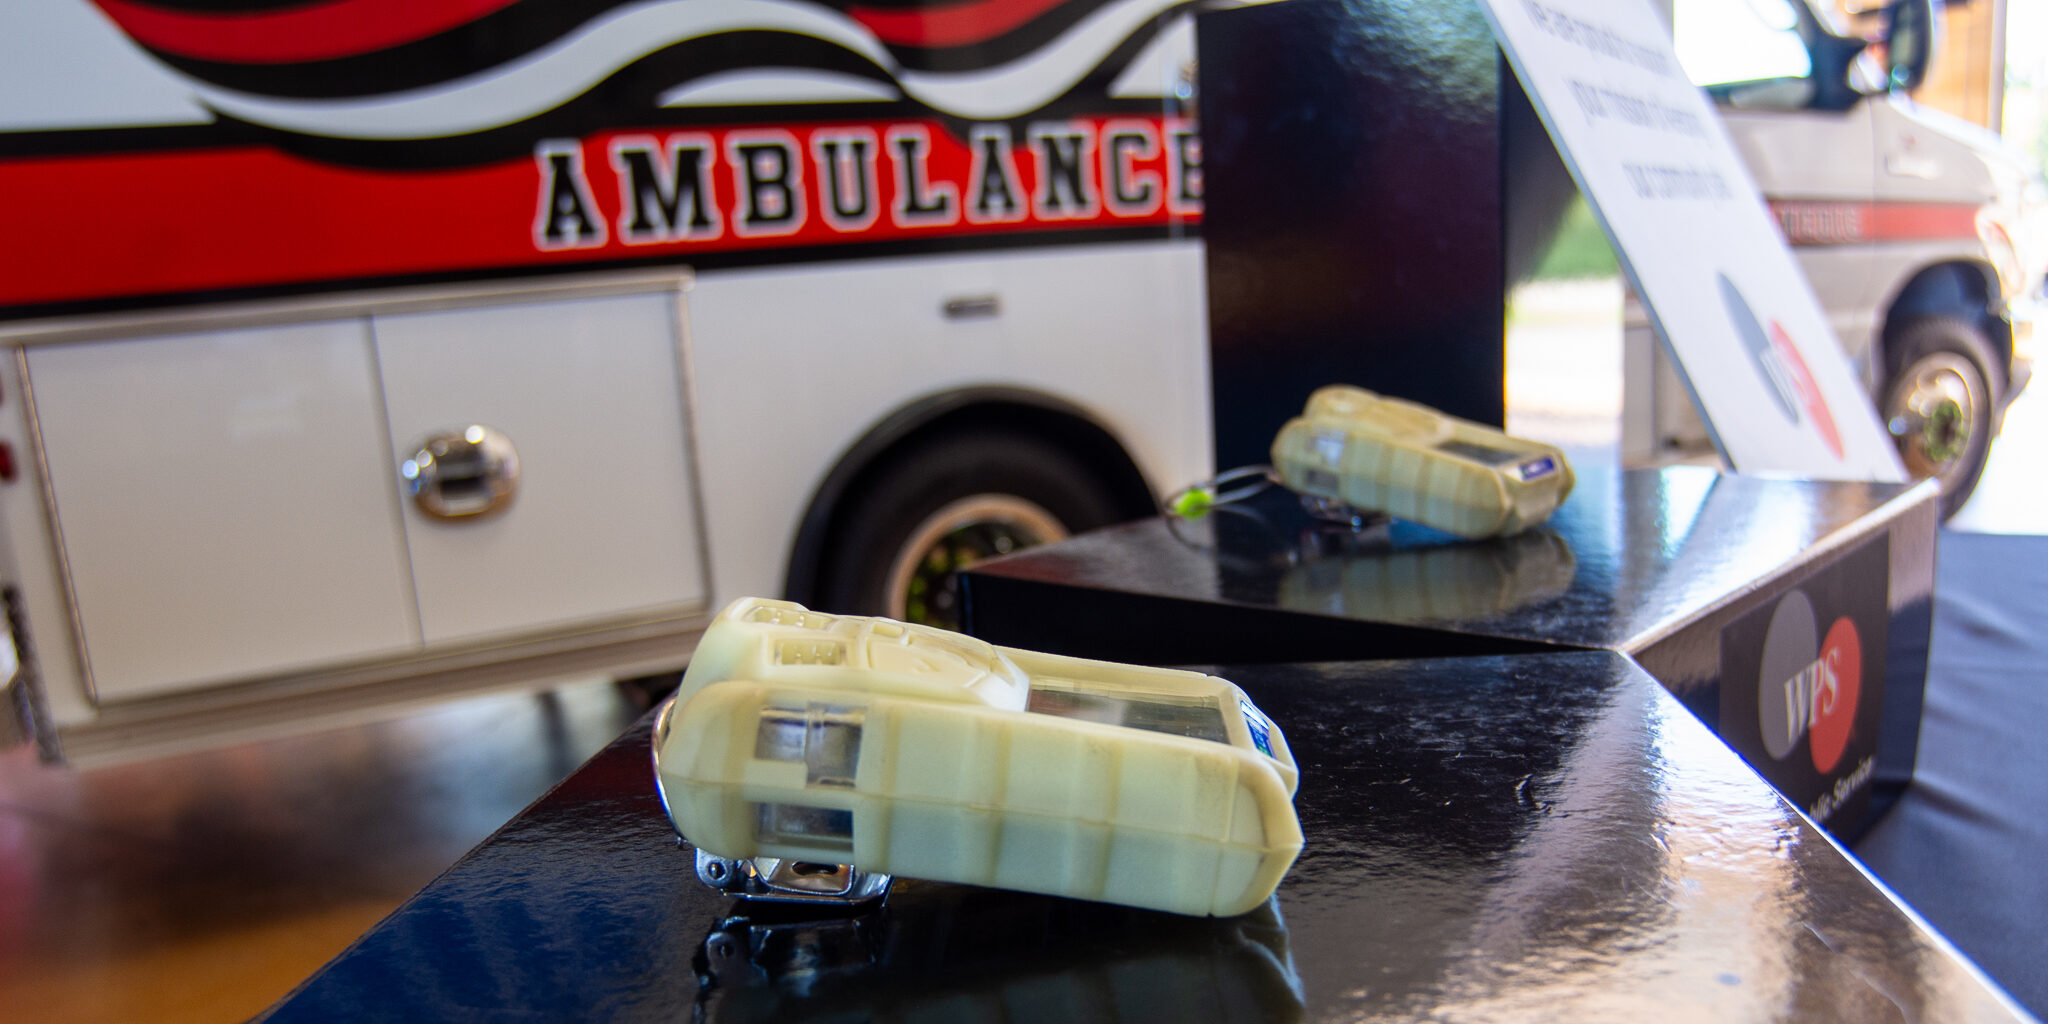 Small grey multi-gas detectors sit on top of black boxes next to an ambulance.